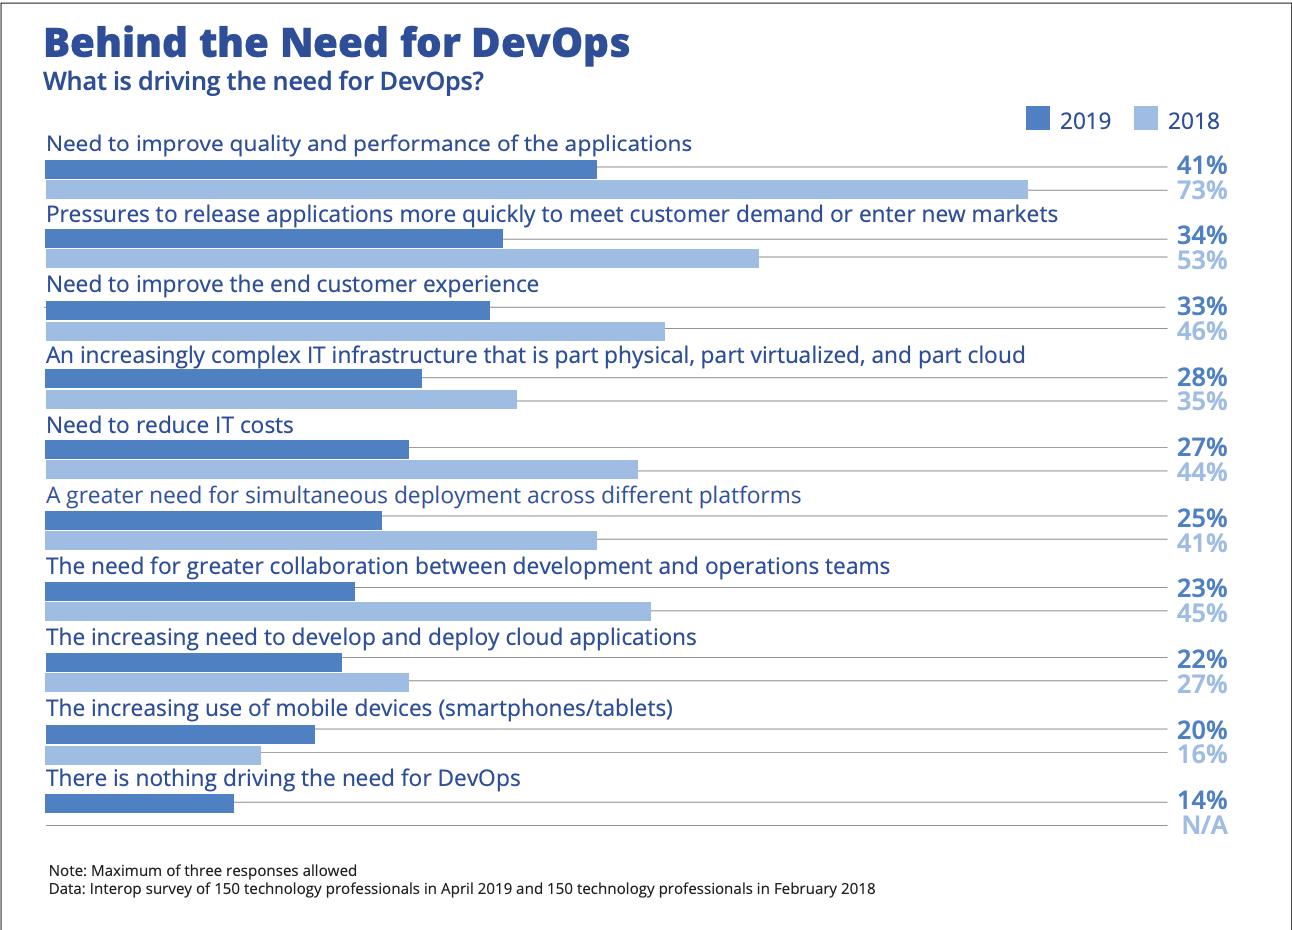 What is driving need for devops?